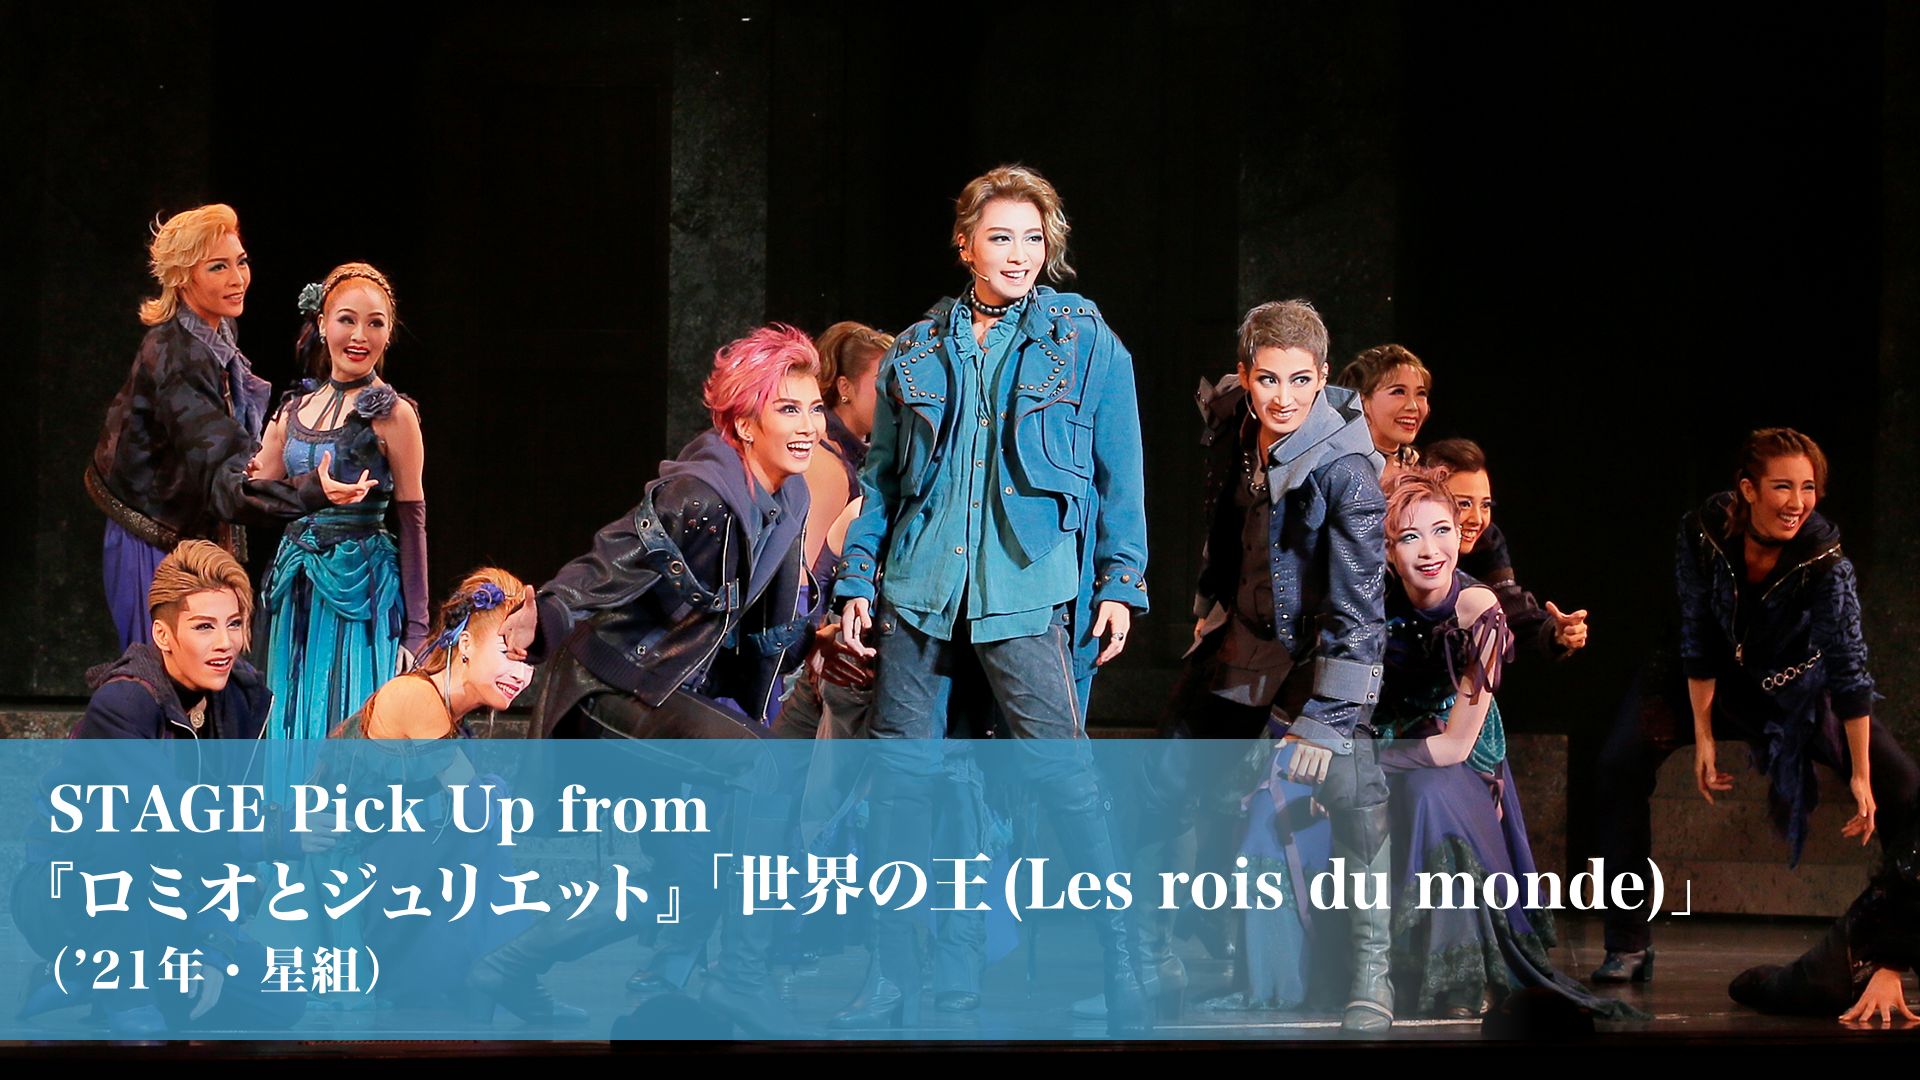 STAGE Pick Up from 『ロミオとジュリエット』「世界の王 (Les rois du monde)」('21年・星組)